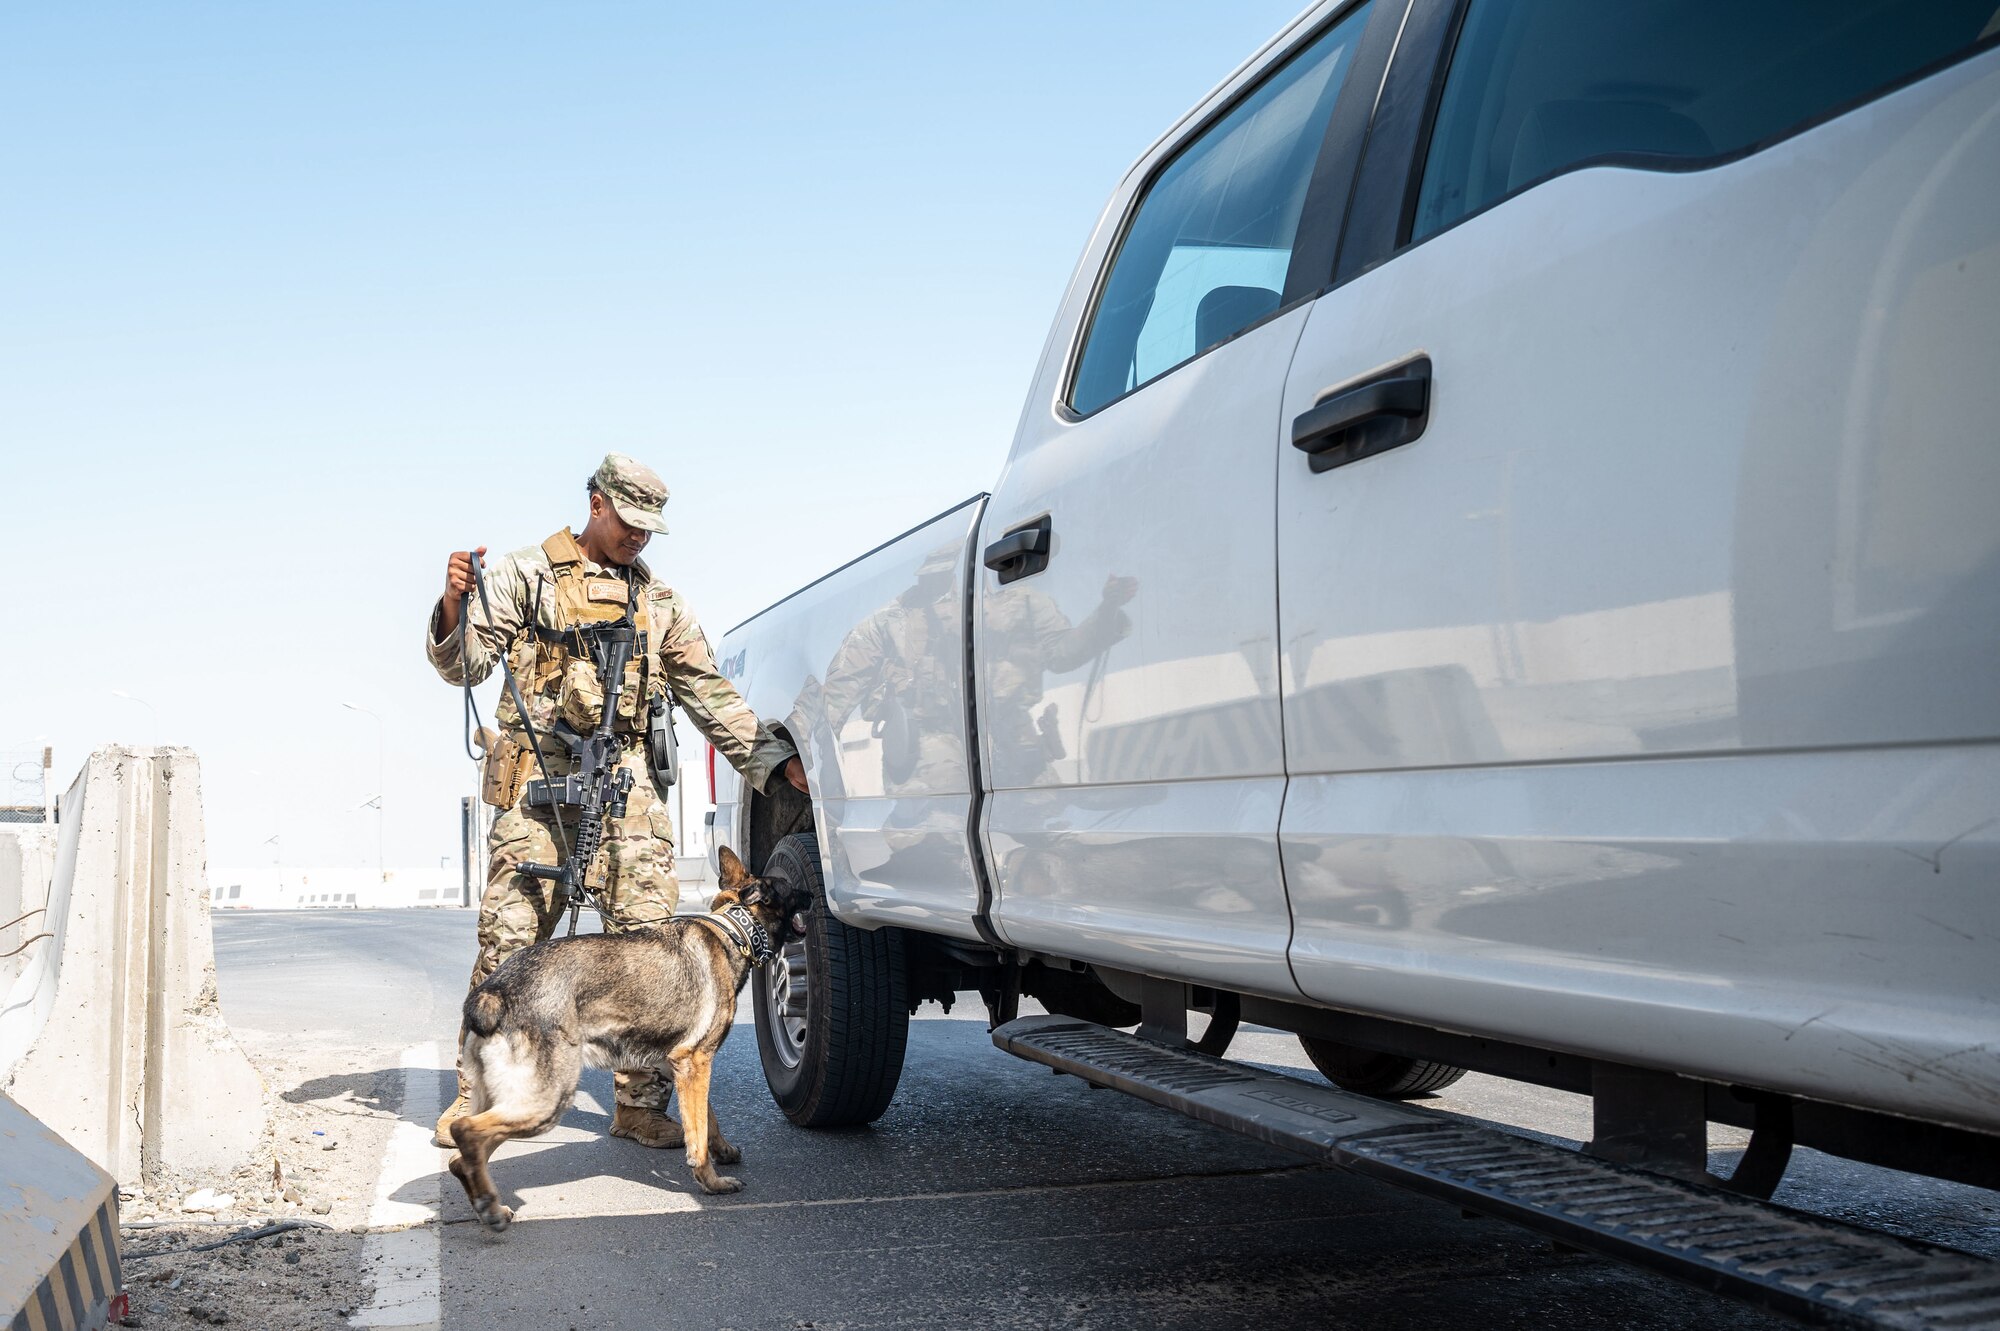 Staff Sgt. Michael Mandel performs a routine vehicle check.